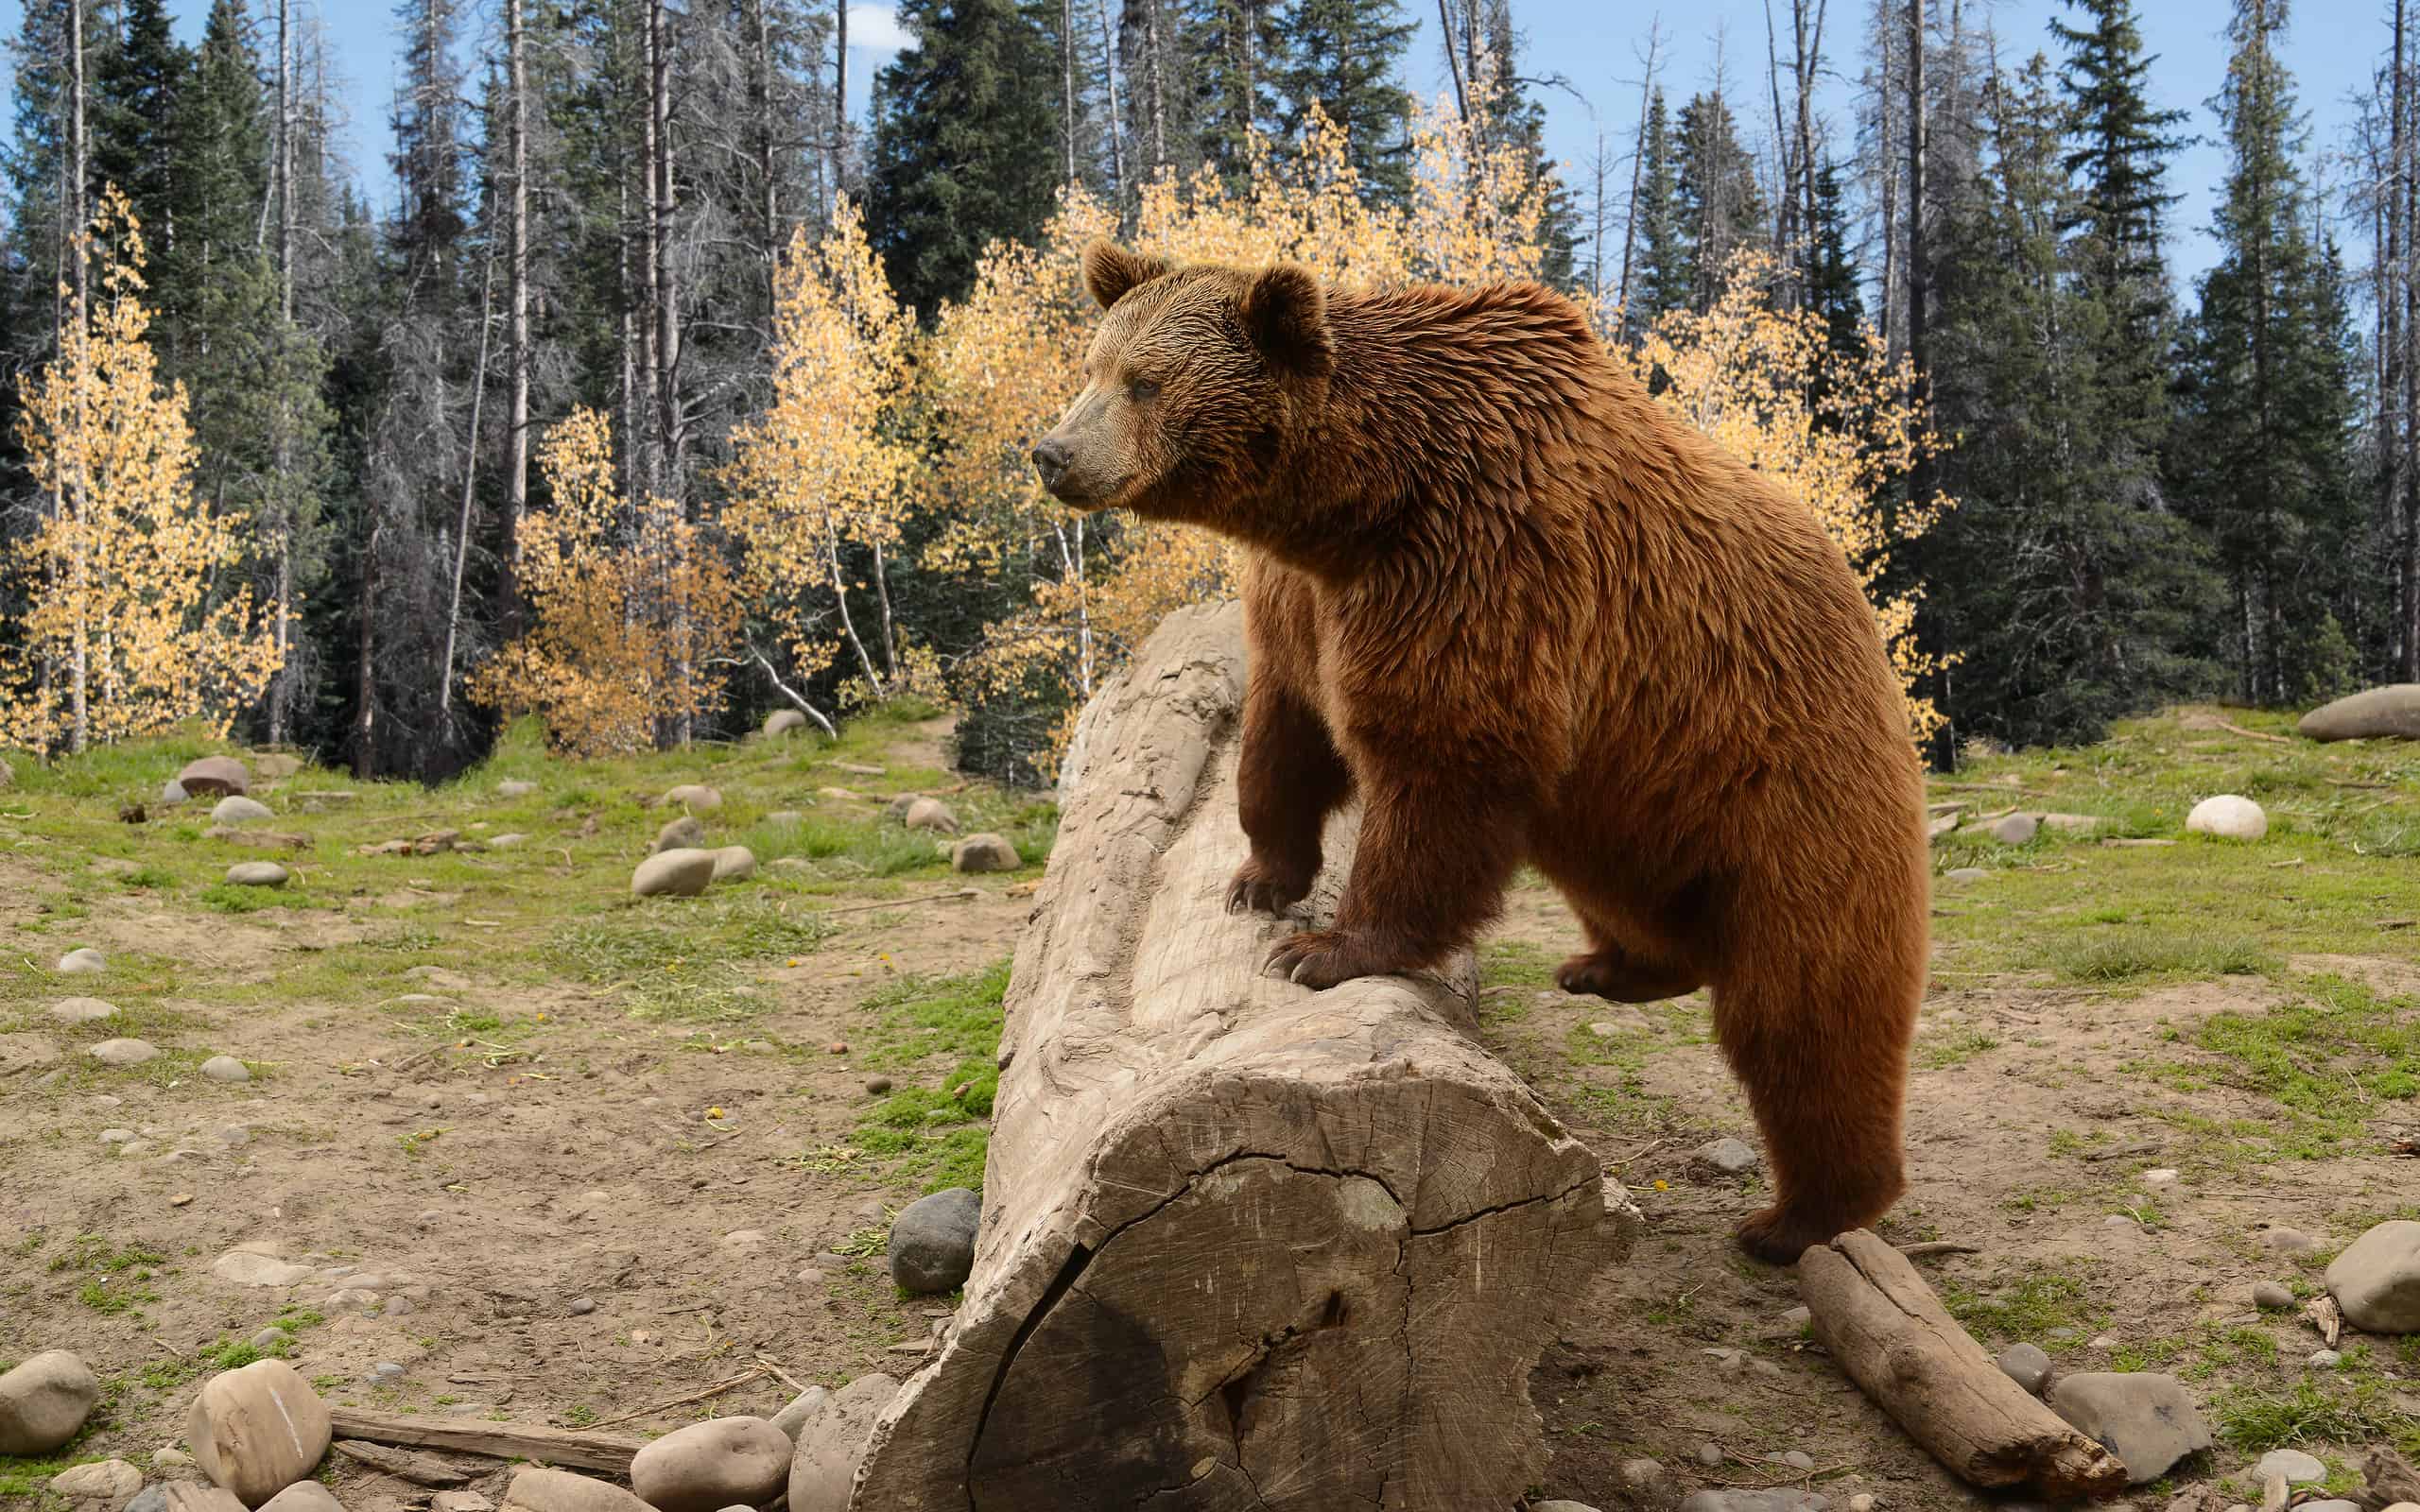 Grizzly bear climbing over a log in fall wood in Montana